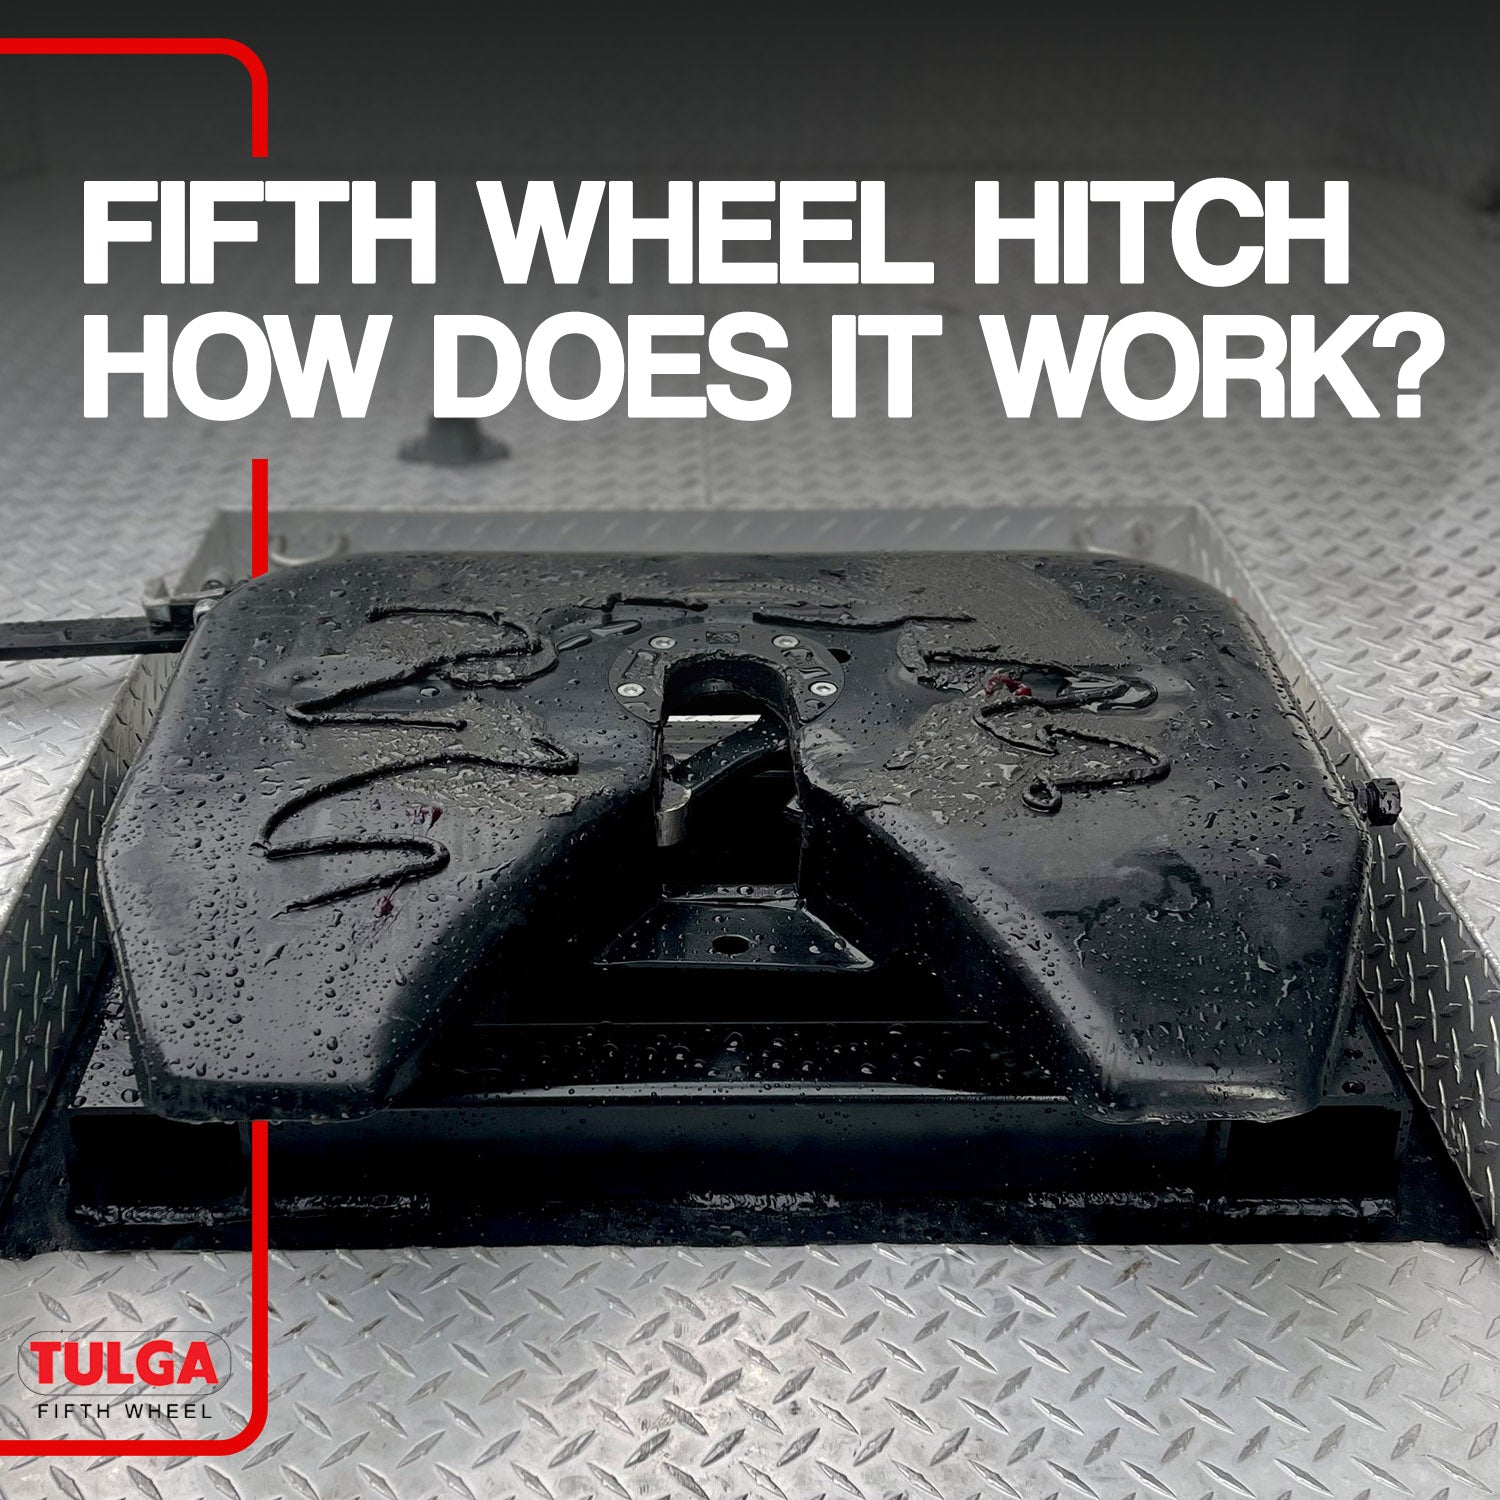 Fifth Wheel Hitch: How Does It Work?